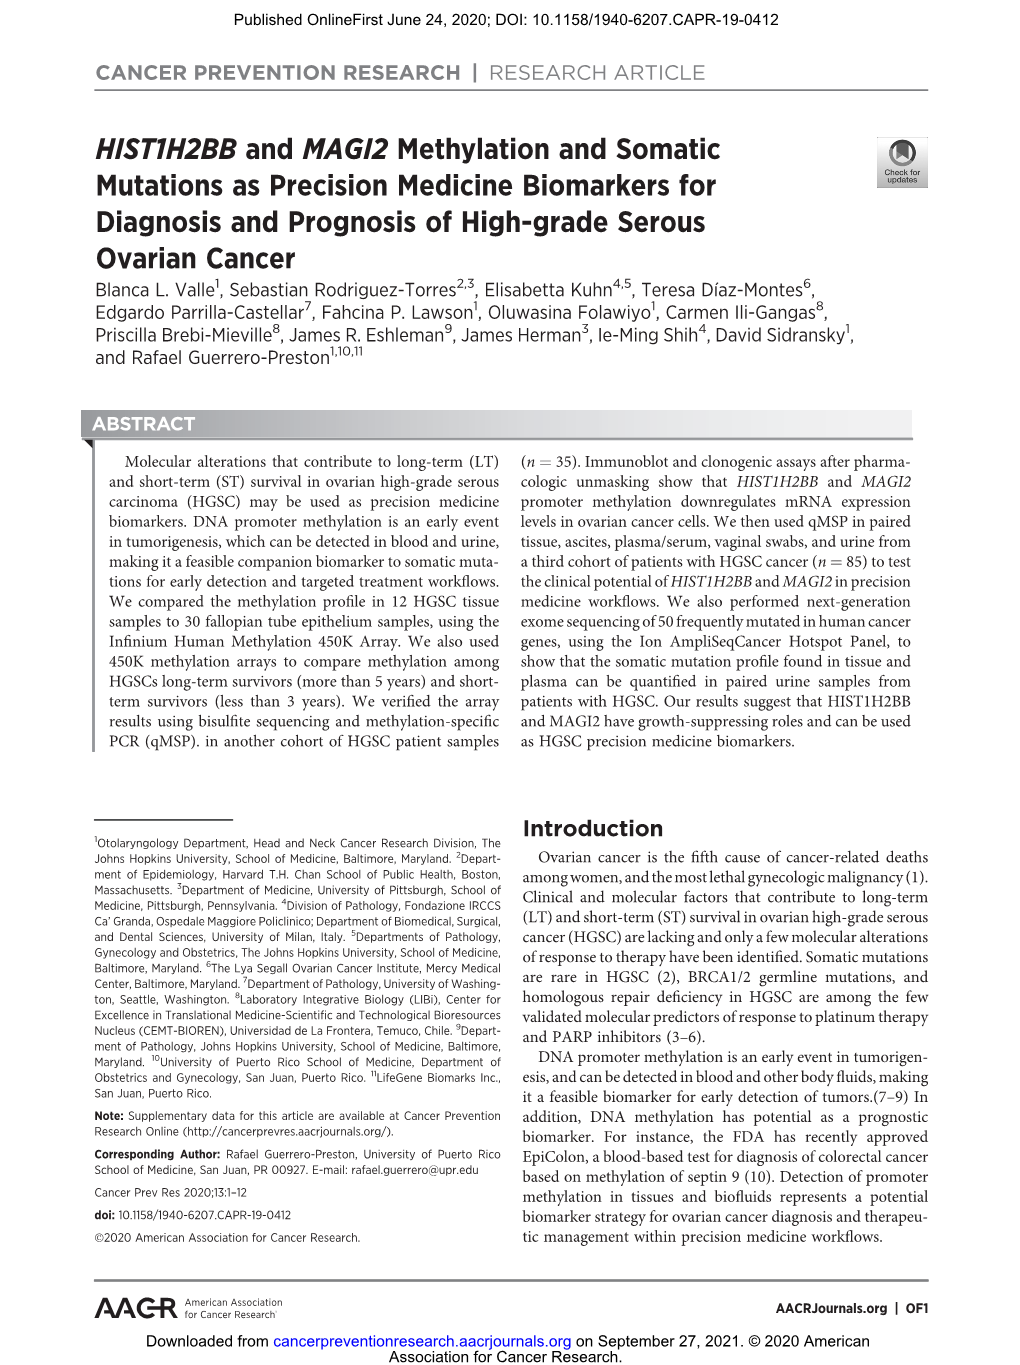 HIST1H2BB and MAGI2 Methylation and Somatic Mutations As Precision Medicine Biomarkers for Diagnosis and Prognosis of High-Grade Serous Ovarian Cancer Blanca L